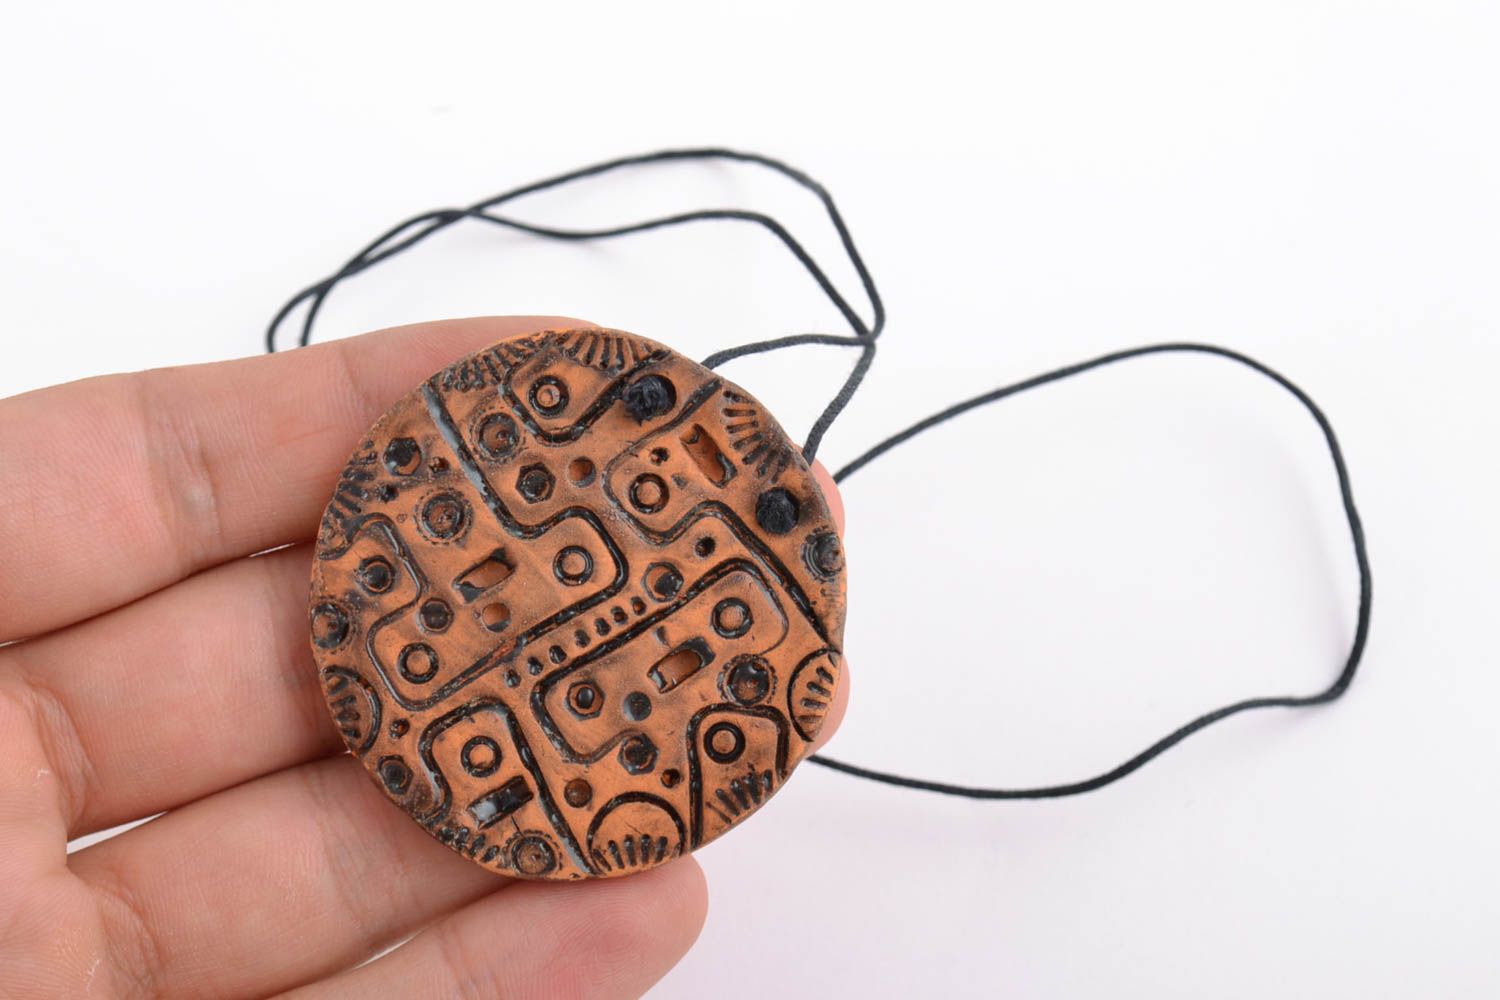 Handmade ethnic ceramic round pendant necklace with relief ornaments for women photo 2